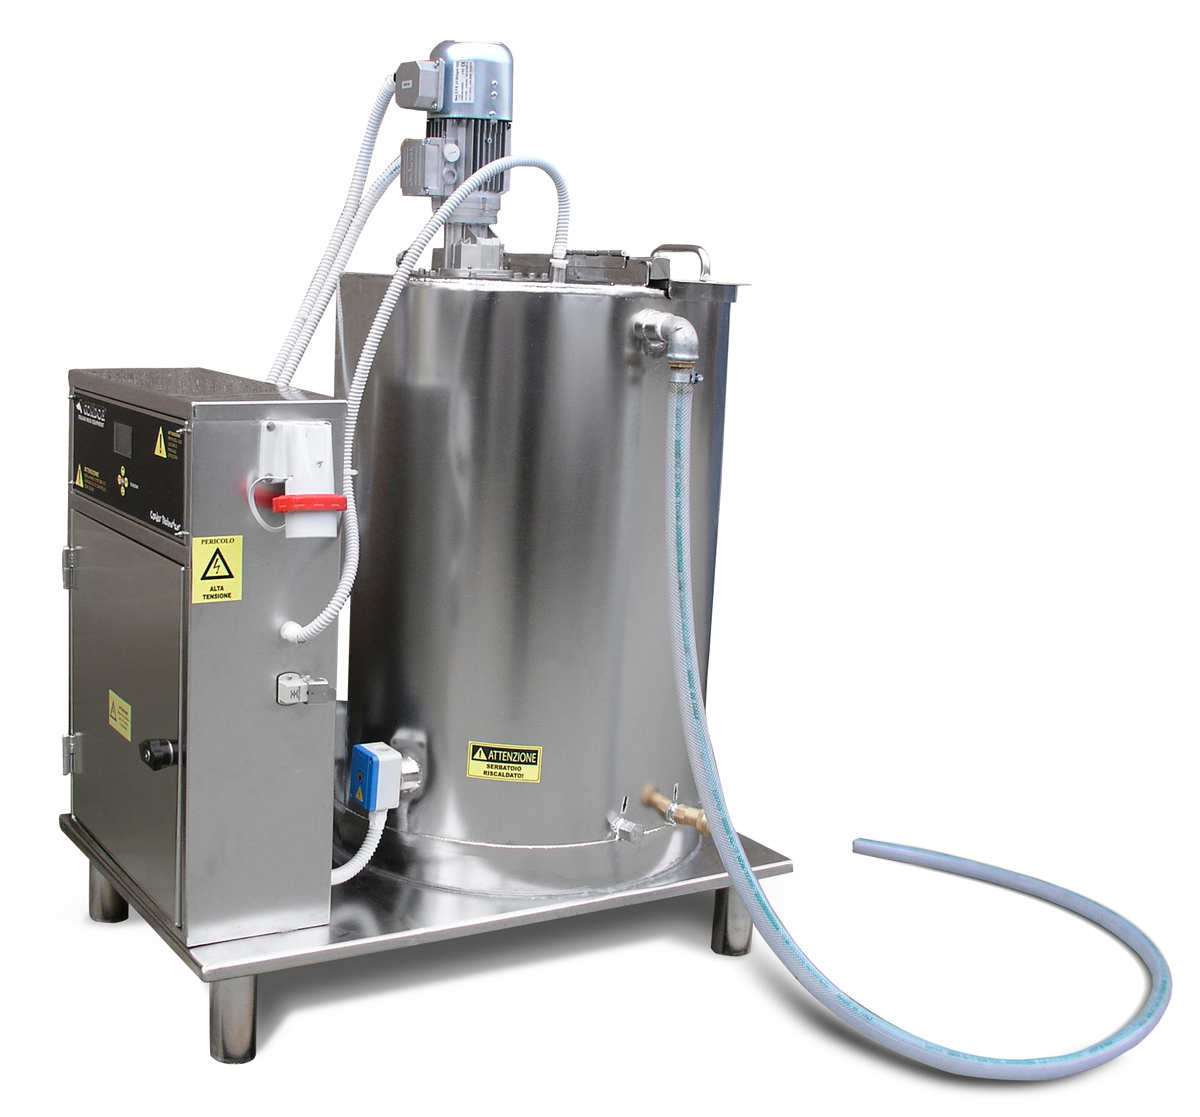 Fixed based milk pasteurizer